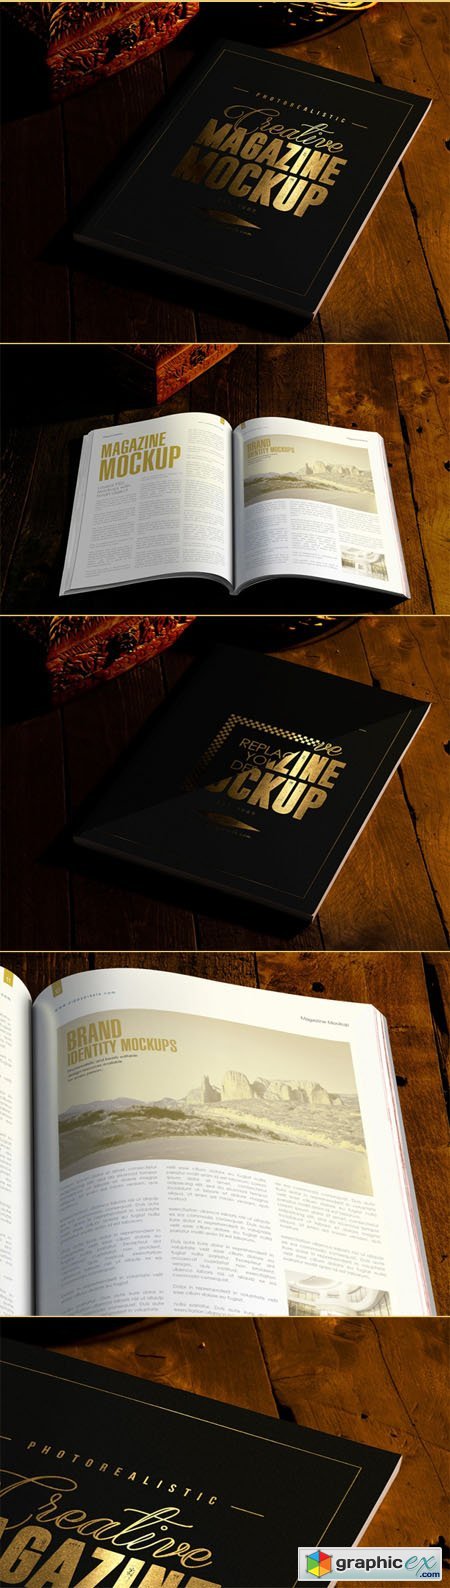 2 Magazine PSD MockUps With Stunning Gold Foil Effect (US Letter Size)